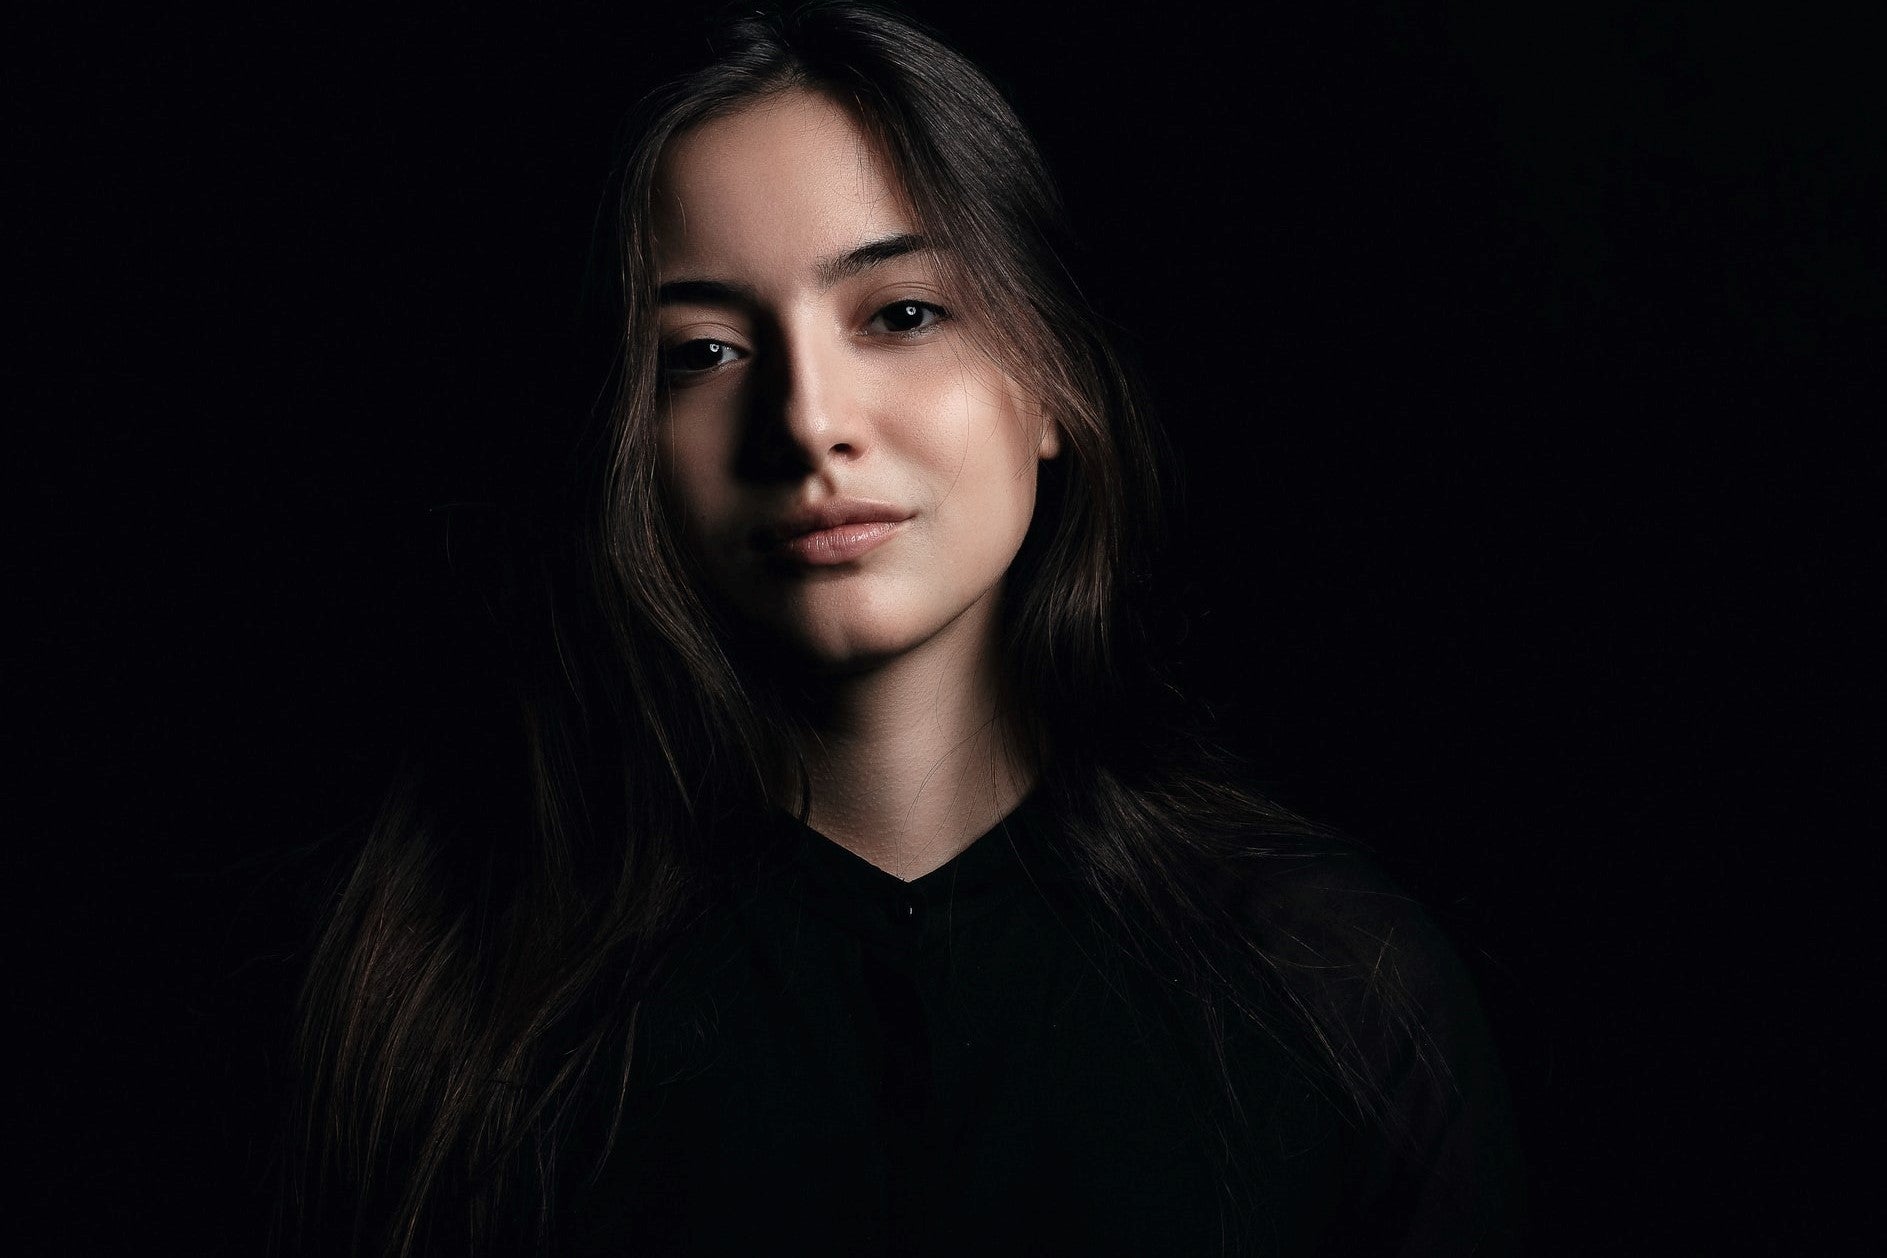 headshot of a girl in black background